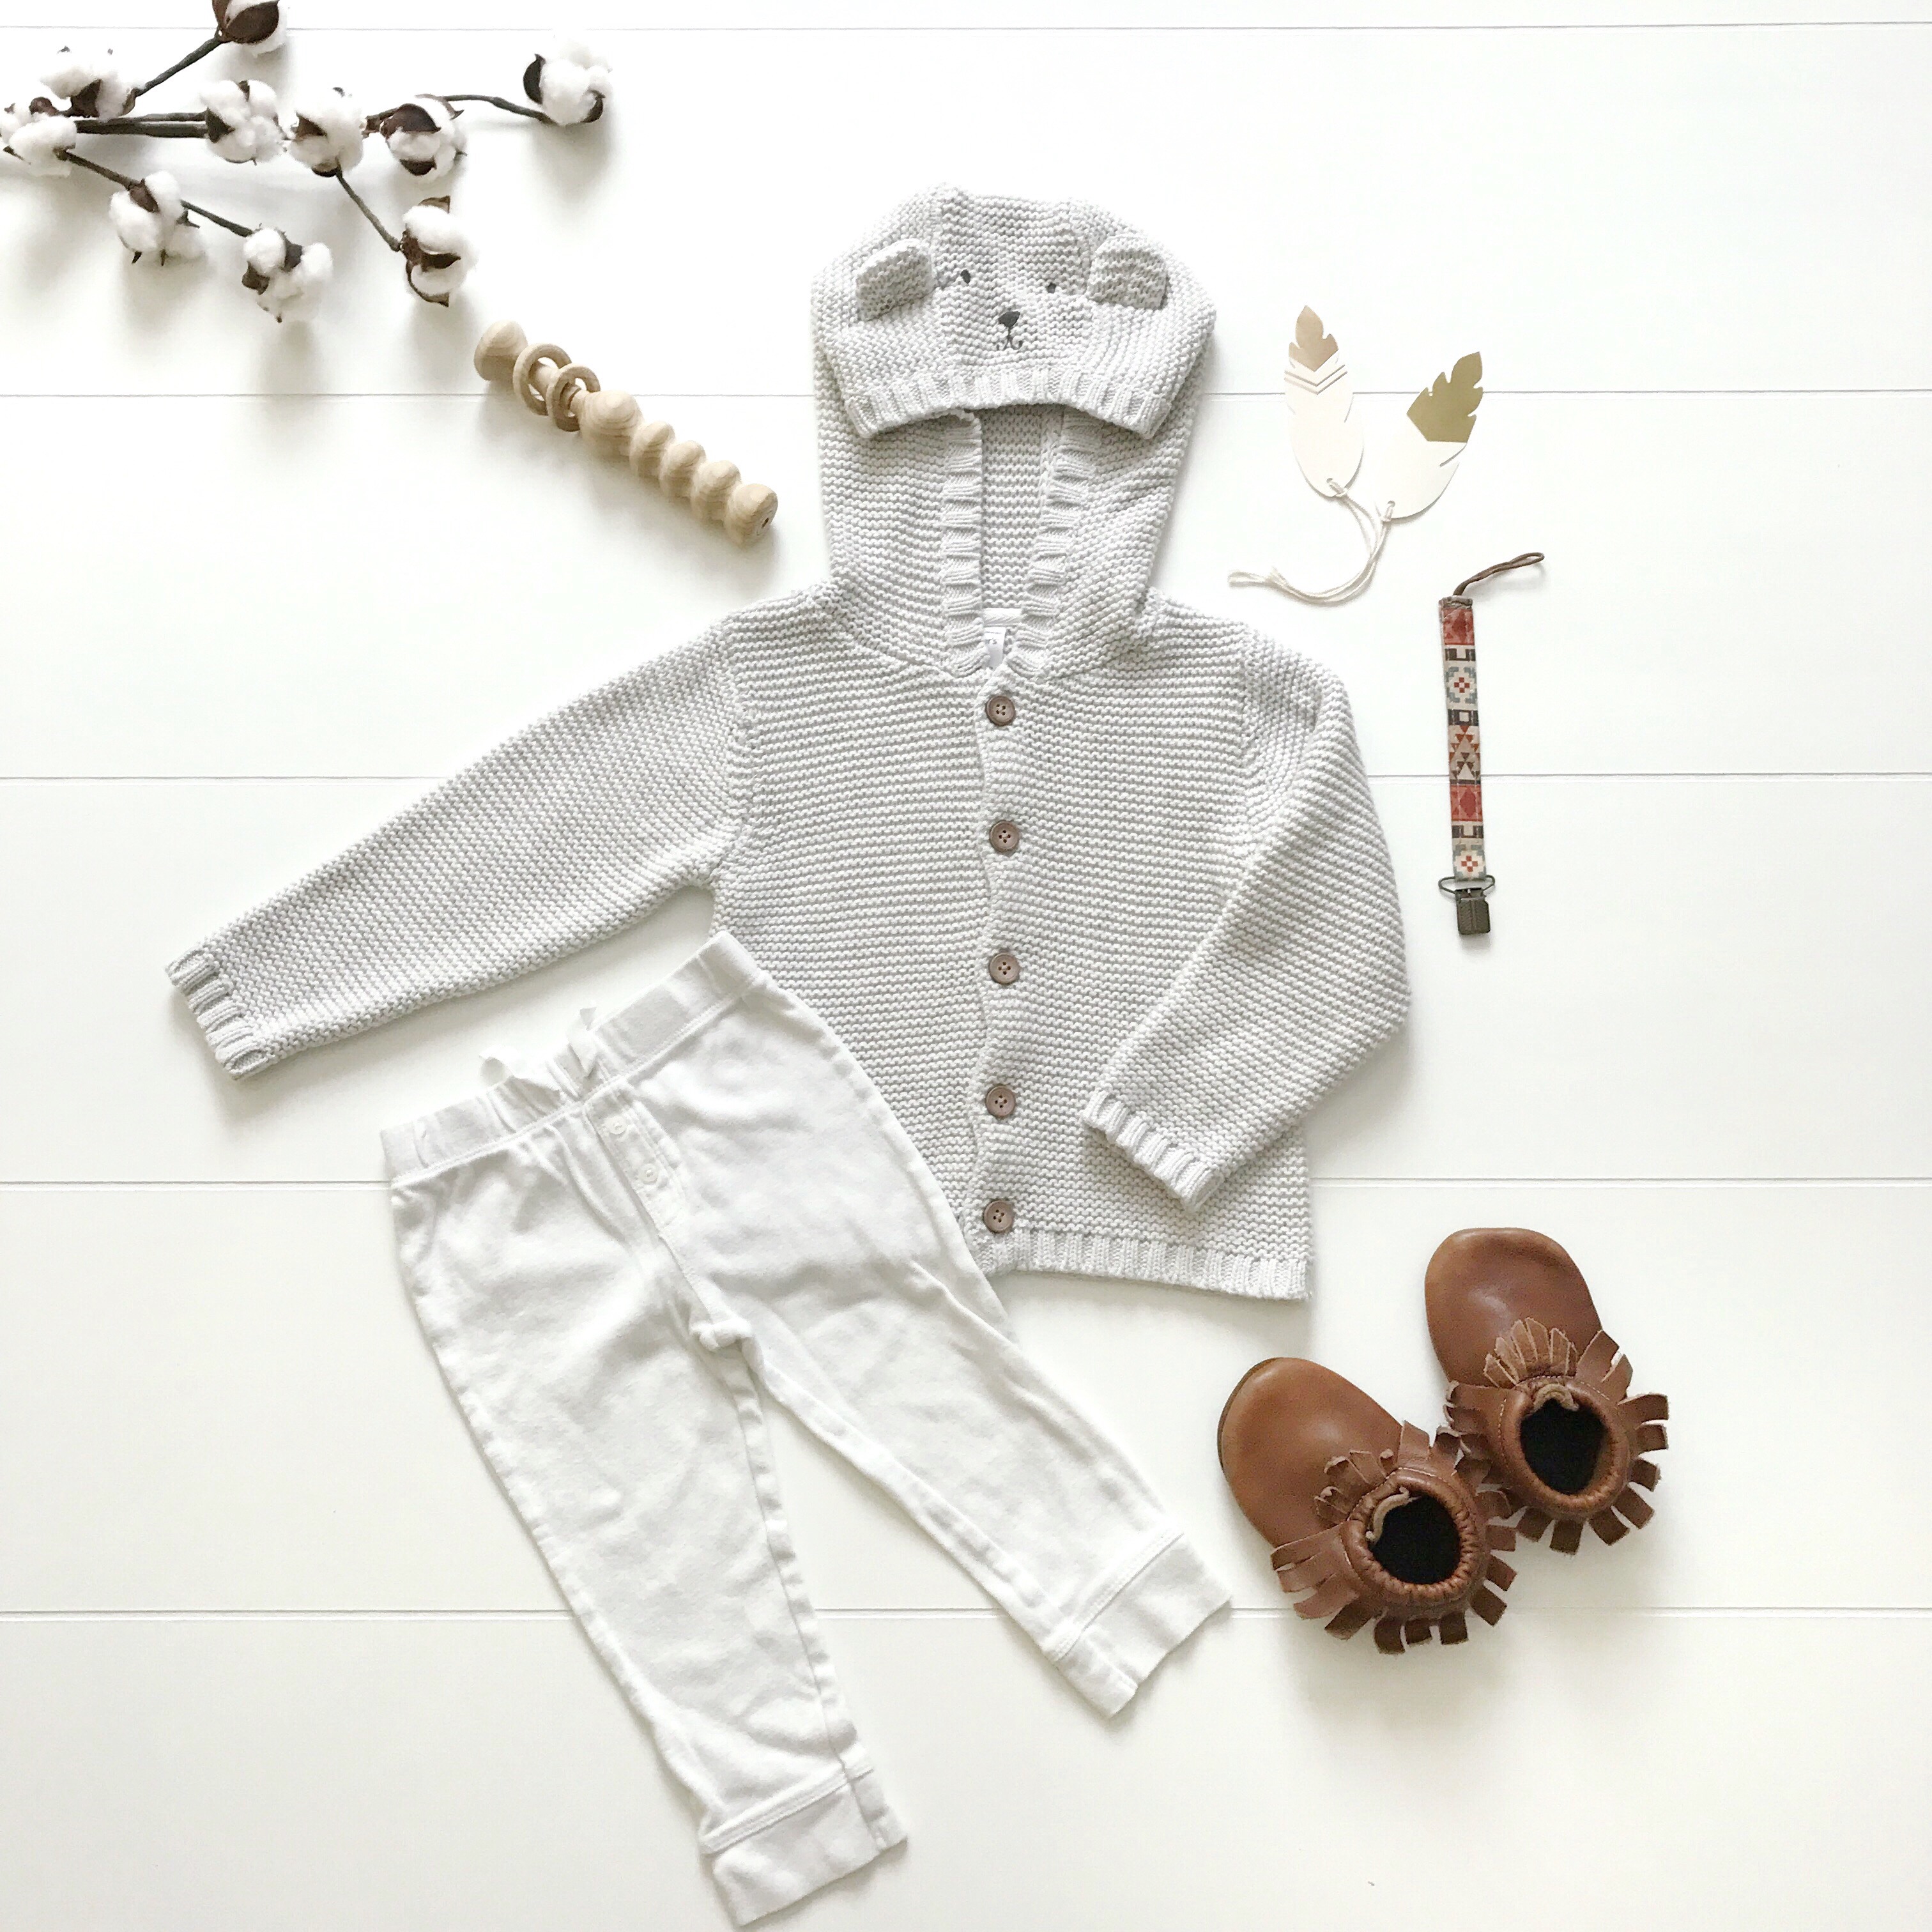 Fall Must-Haves From Carter's for baby and toddler! Baby boy fall outfit inspiration. Toddler boy fall outfit inspiration. Baby girl fall outfit must-haves. Toddler girl fall outfit must-haves.